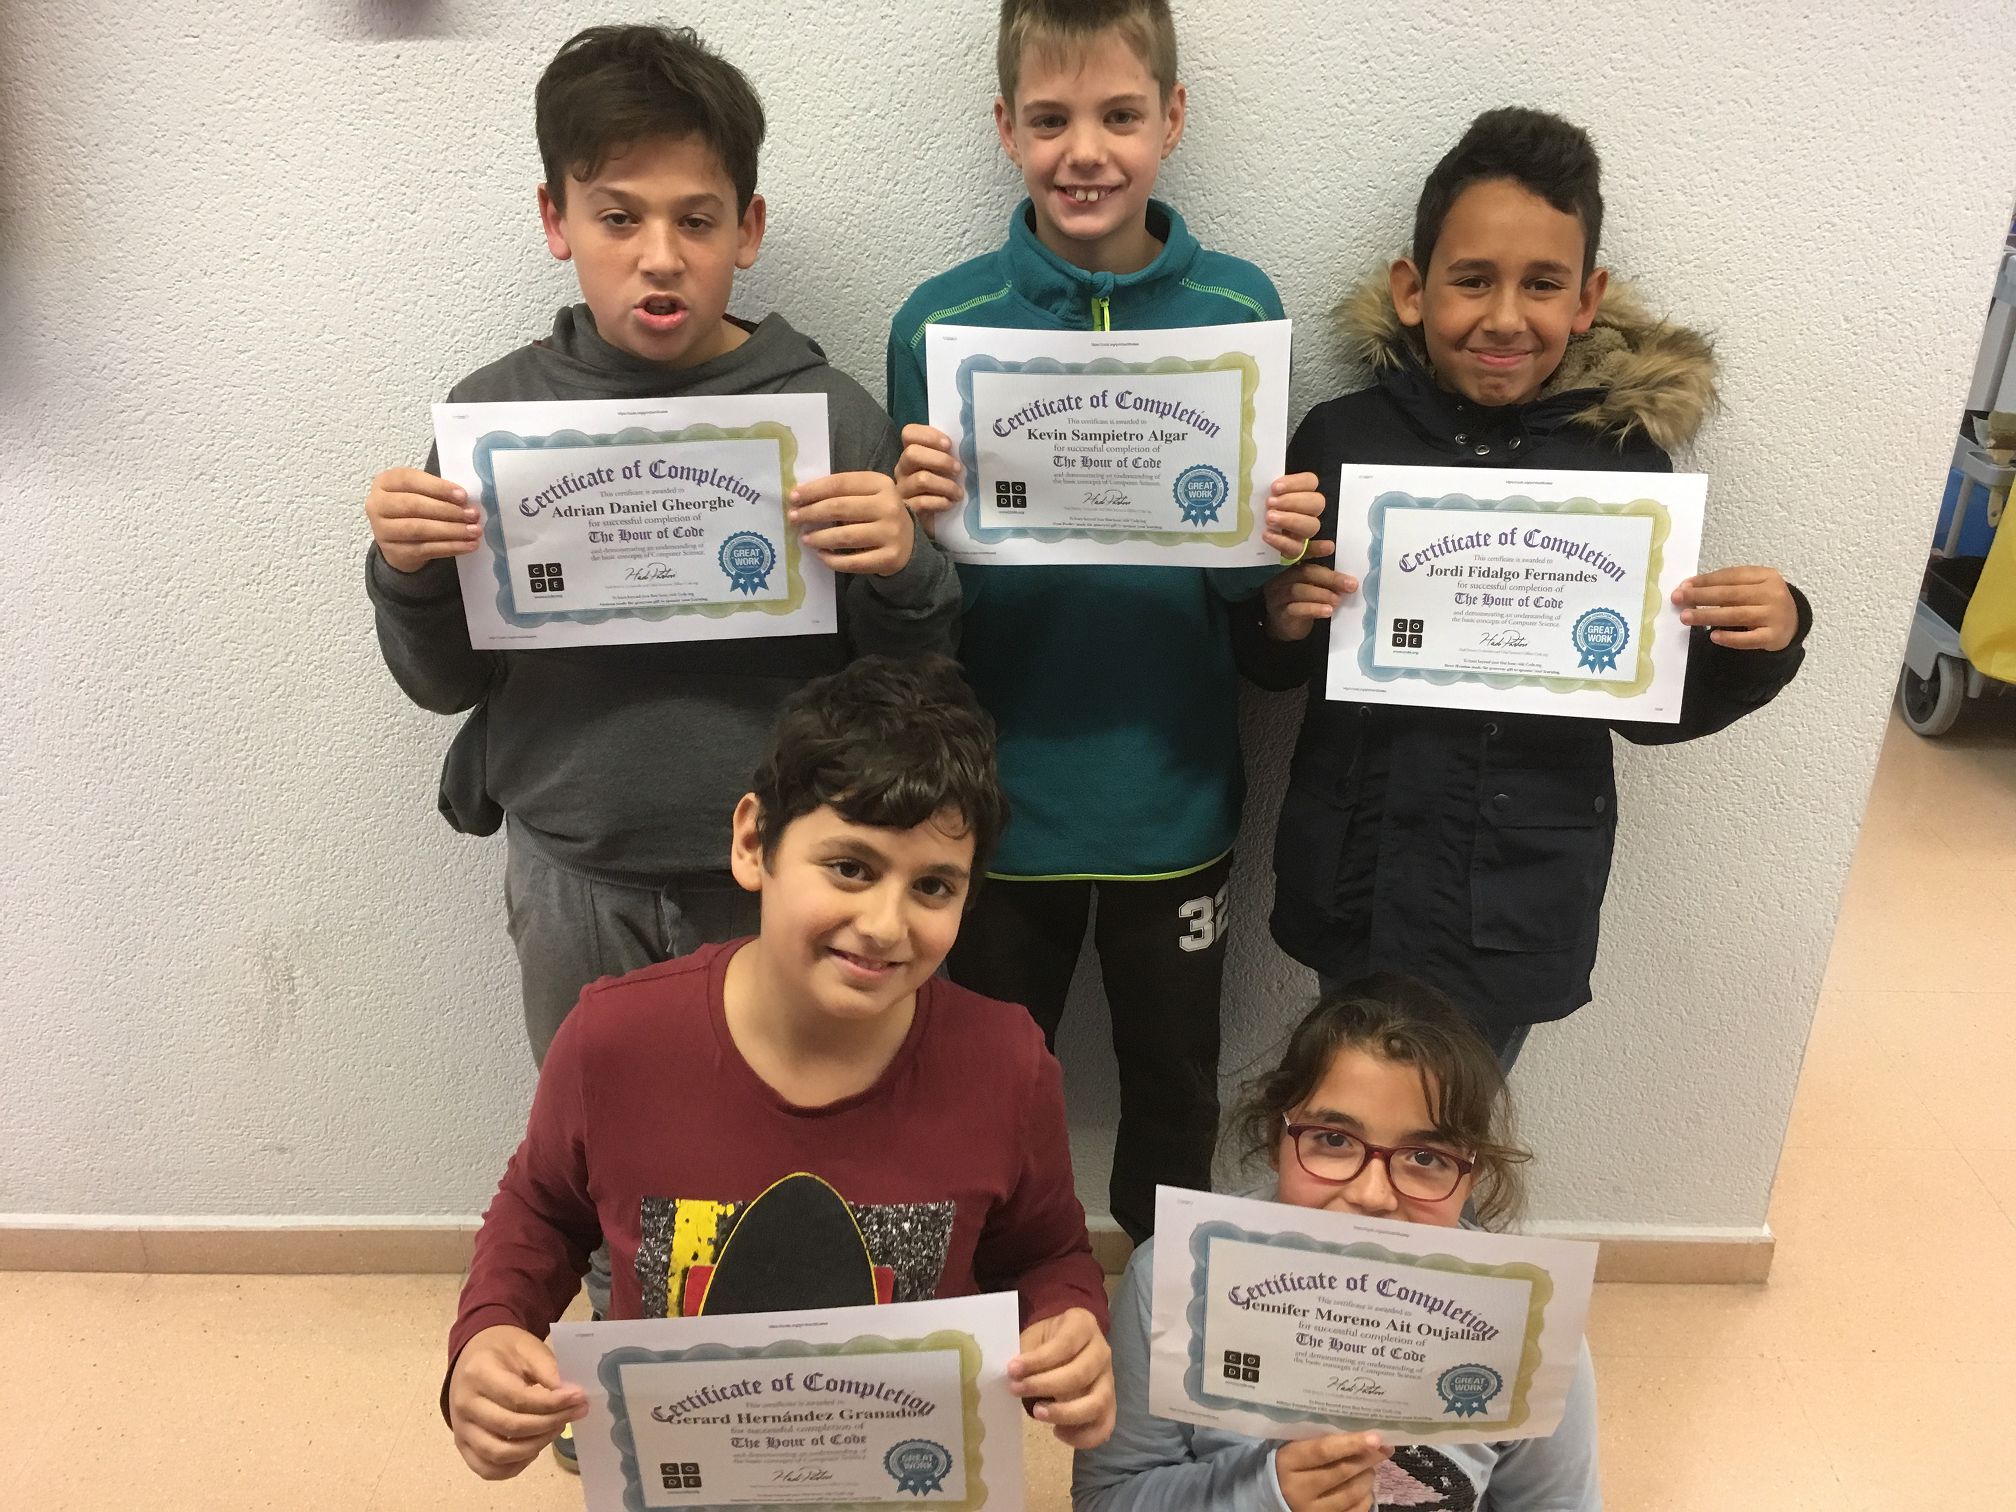 171201 Diplomes Hour of code (2)